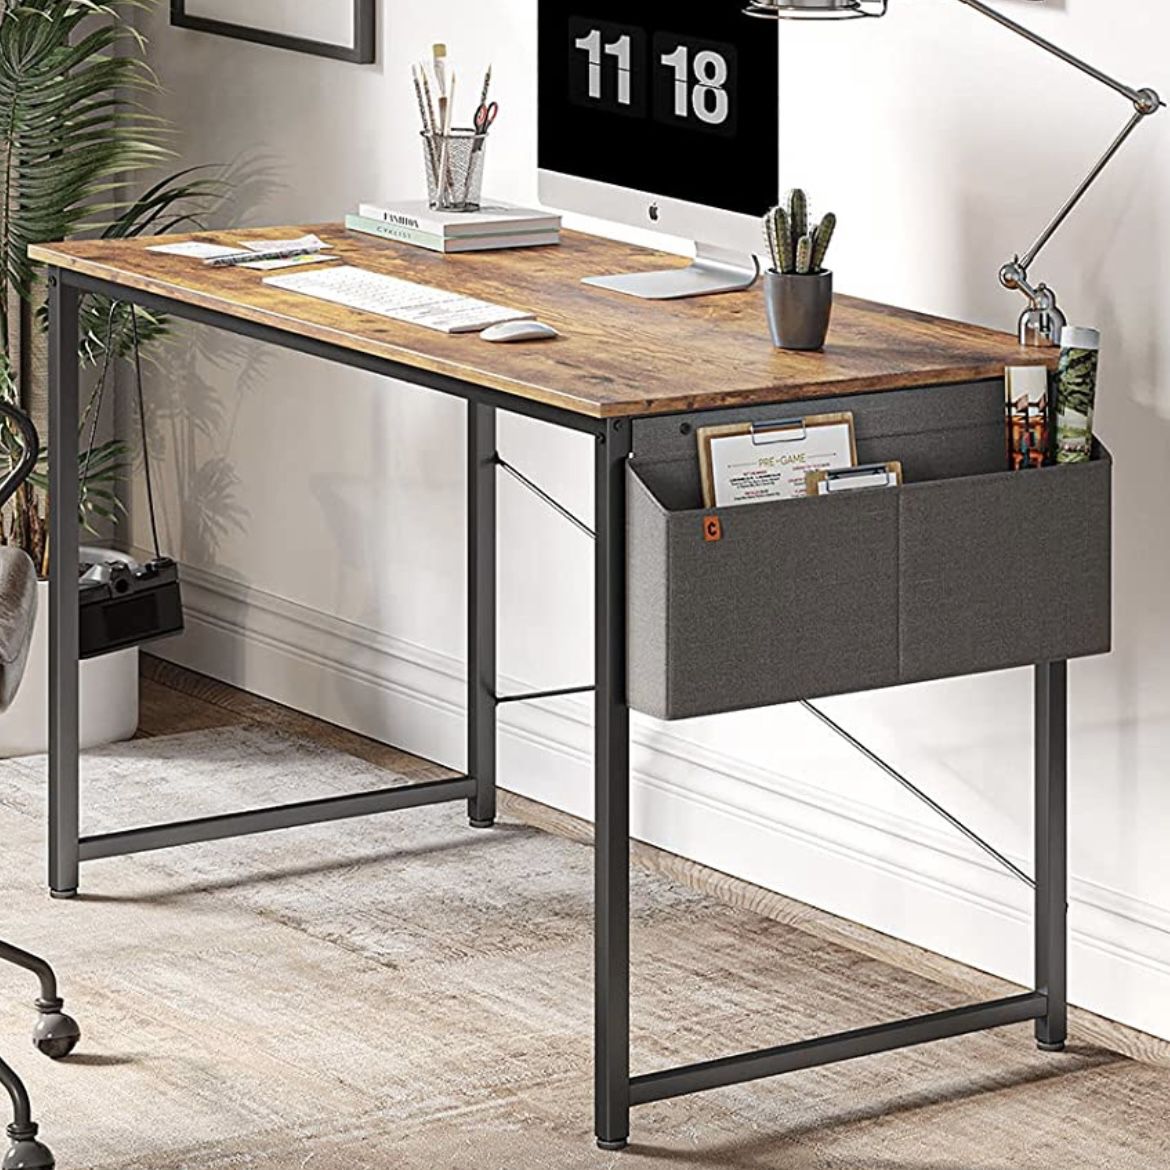 New Computer Desk 47 inches Home Office Workstation Writing Table Study with Storage